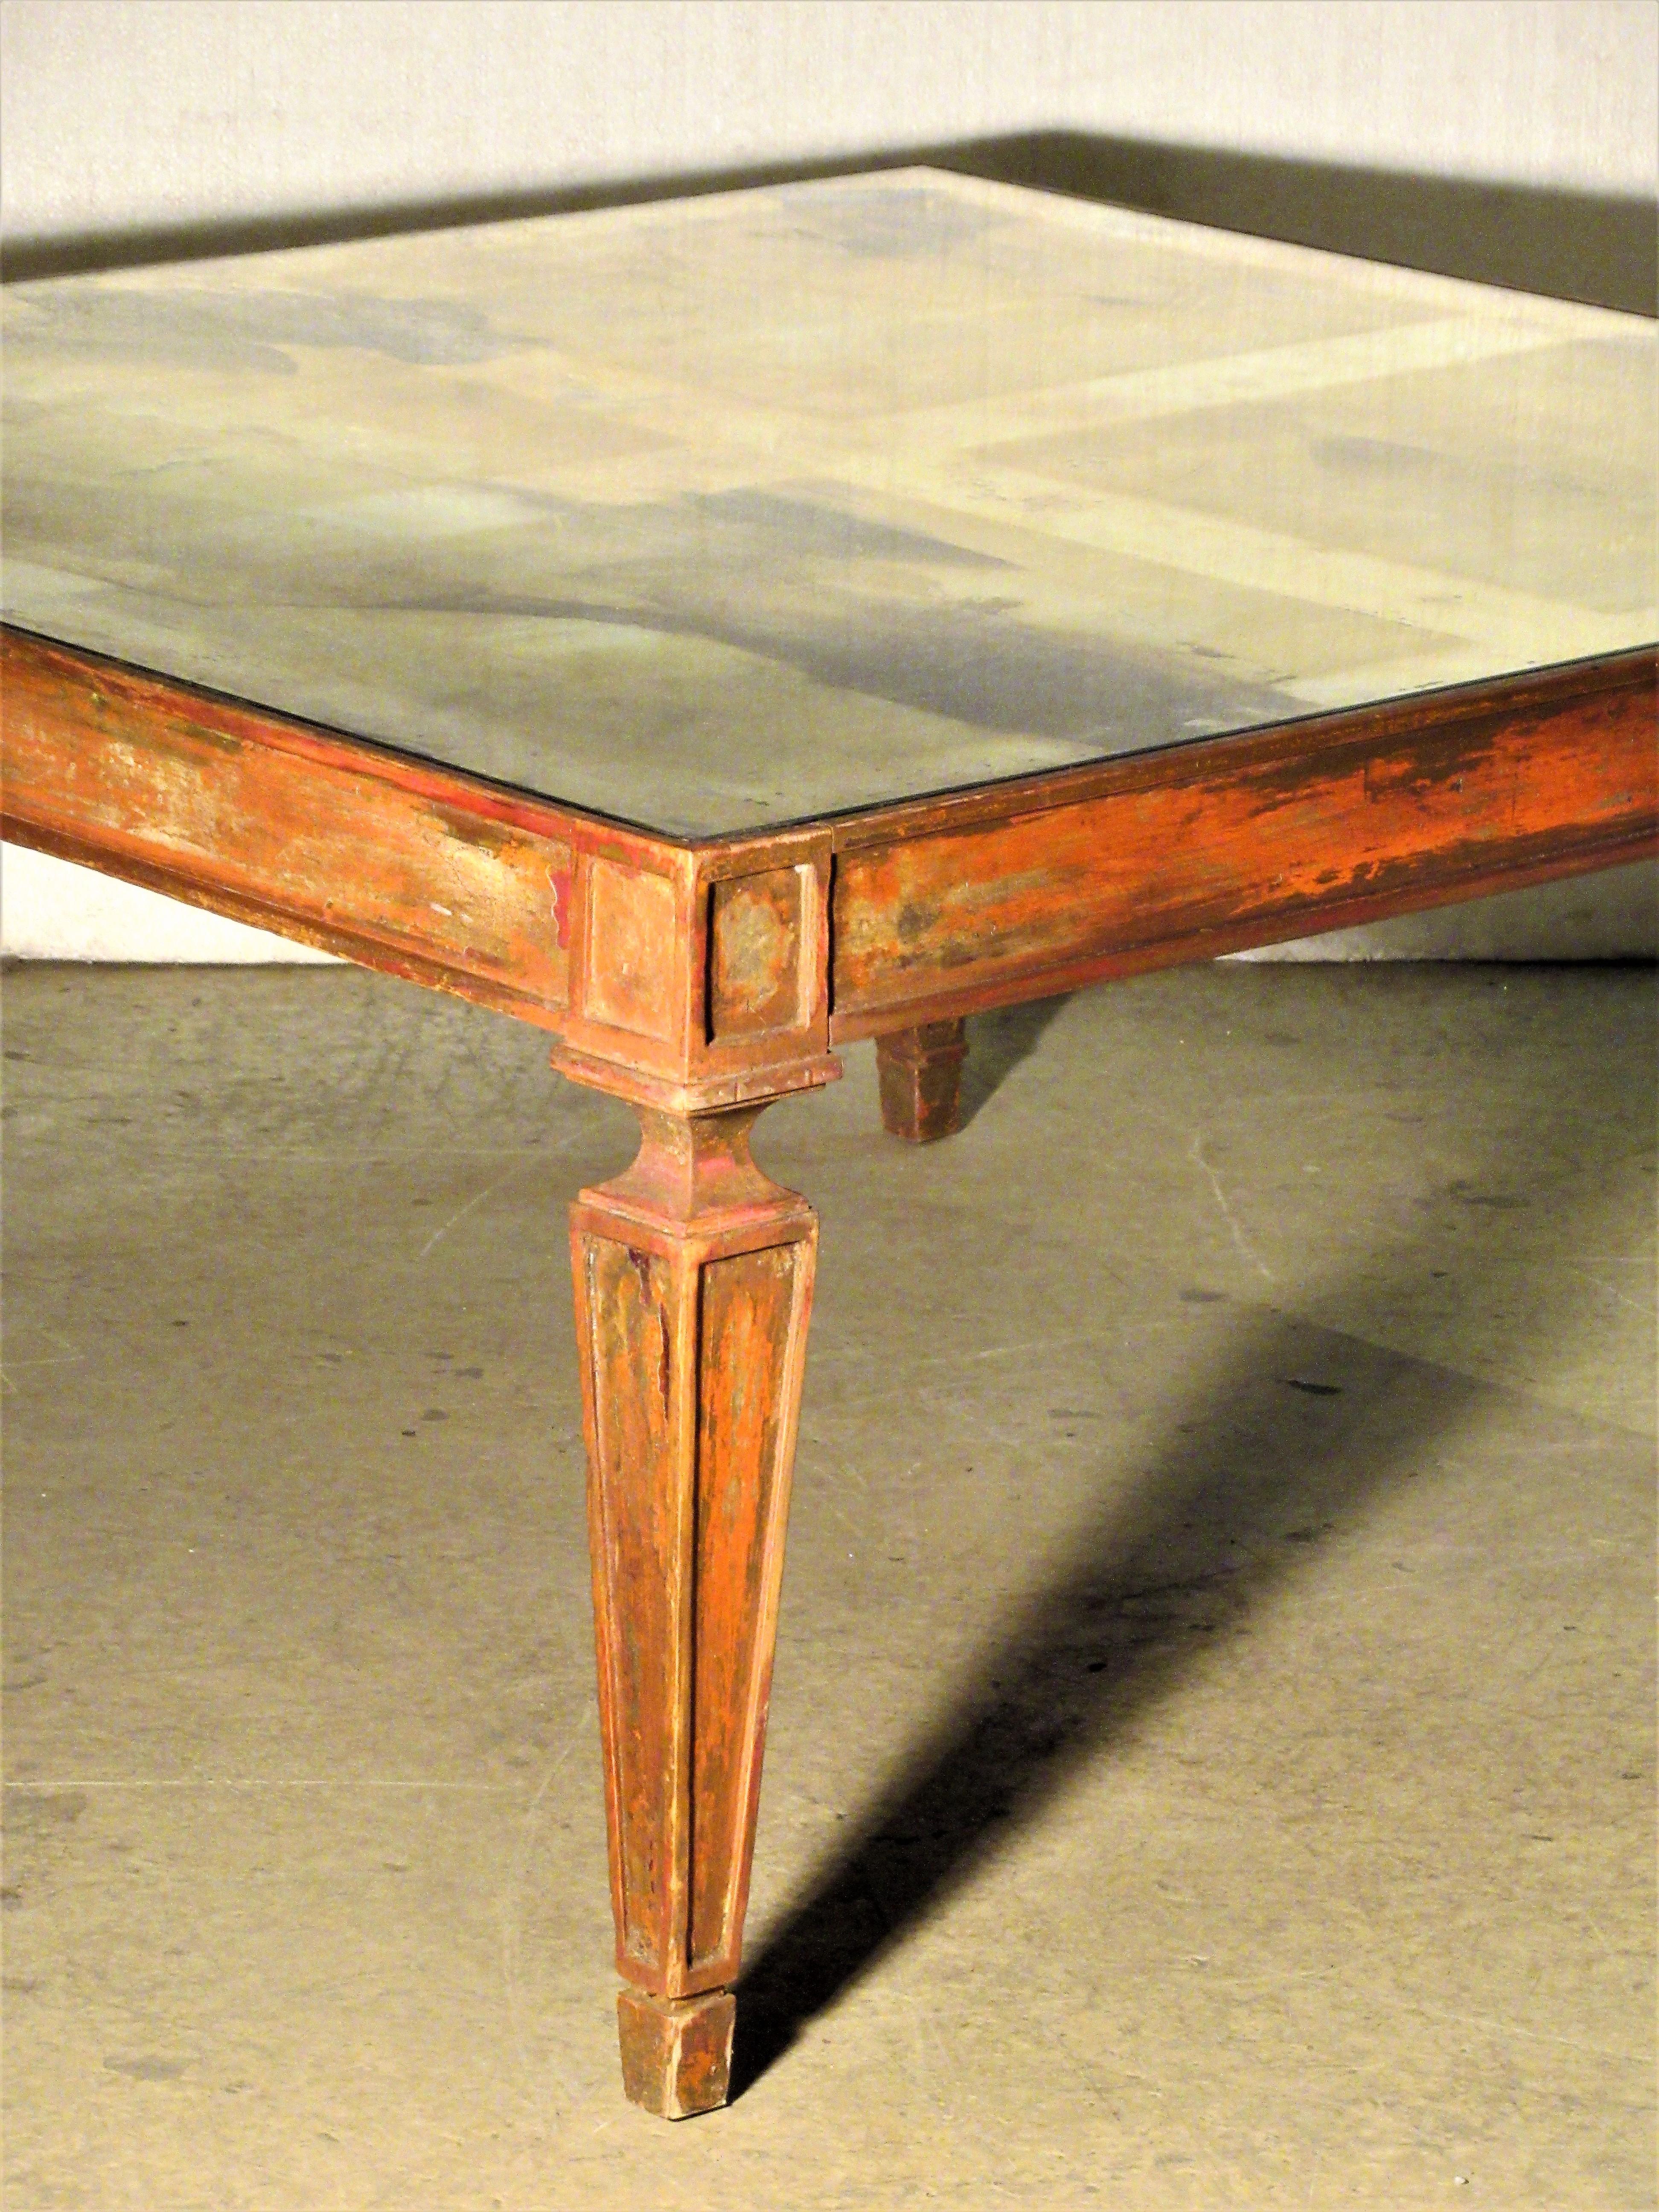 1940s Classical Regency style big square coffee table with the original highly oxidized grid pattern design mirrored top. The wood base has been stripped and scraped down to the old red bold painted surface revealing a wide range of colors and very